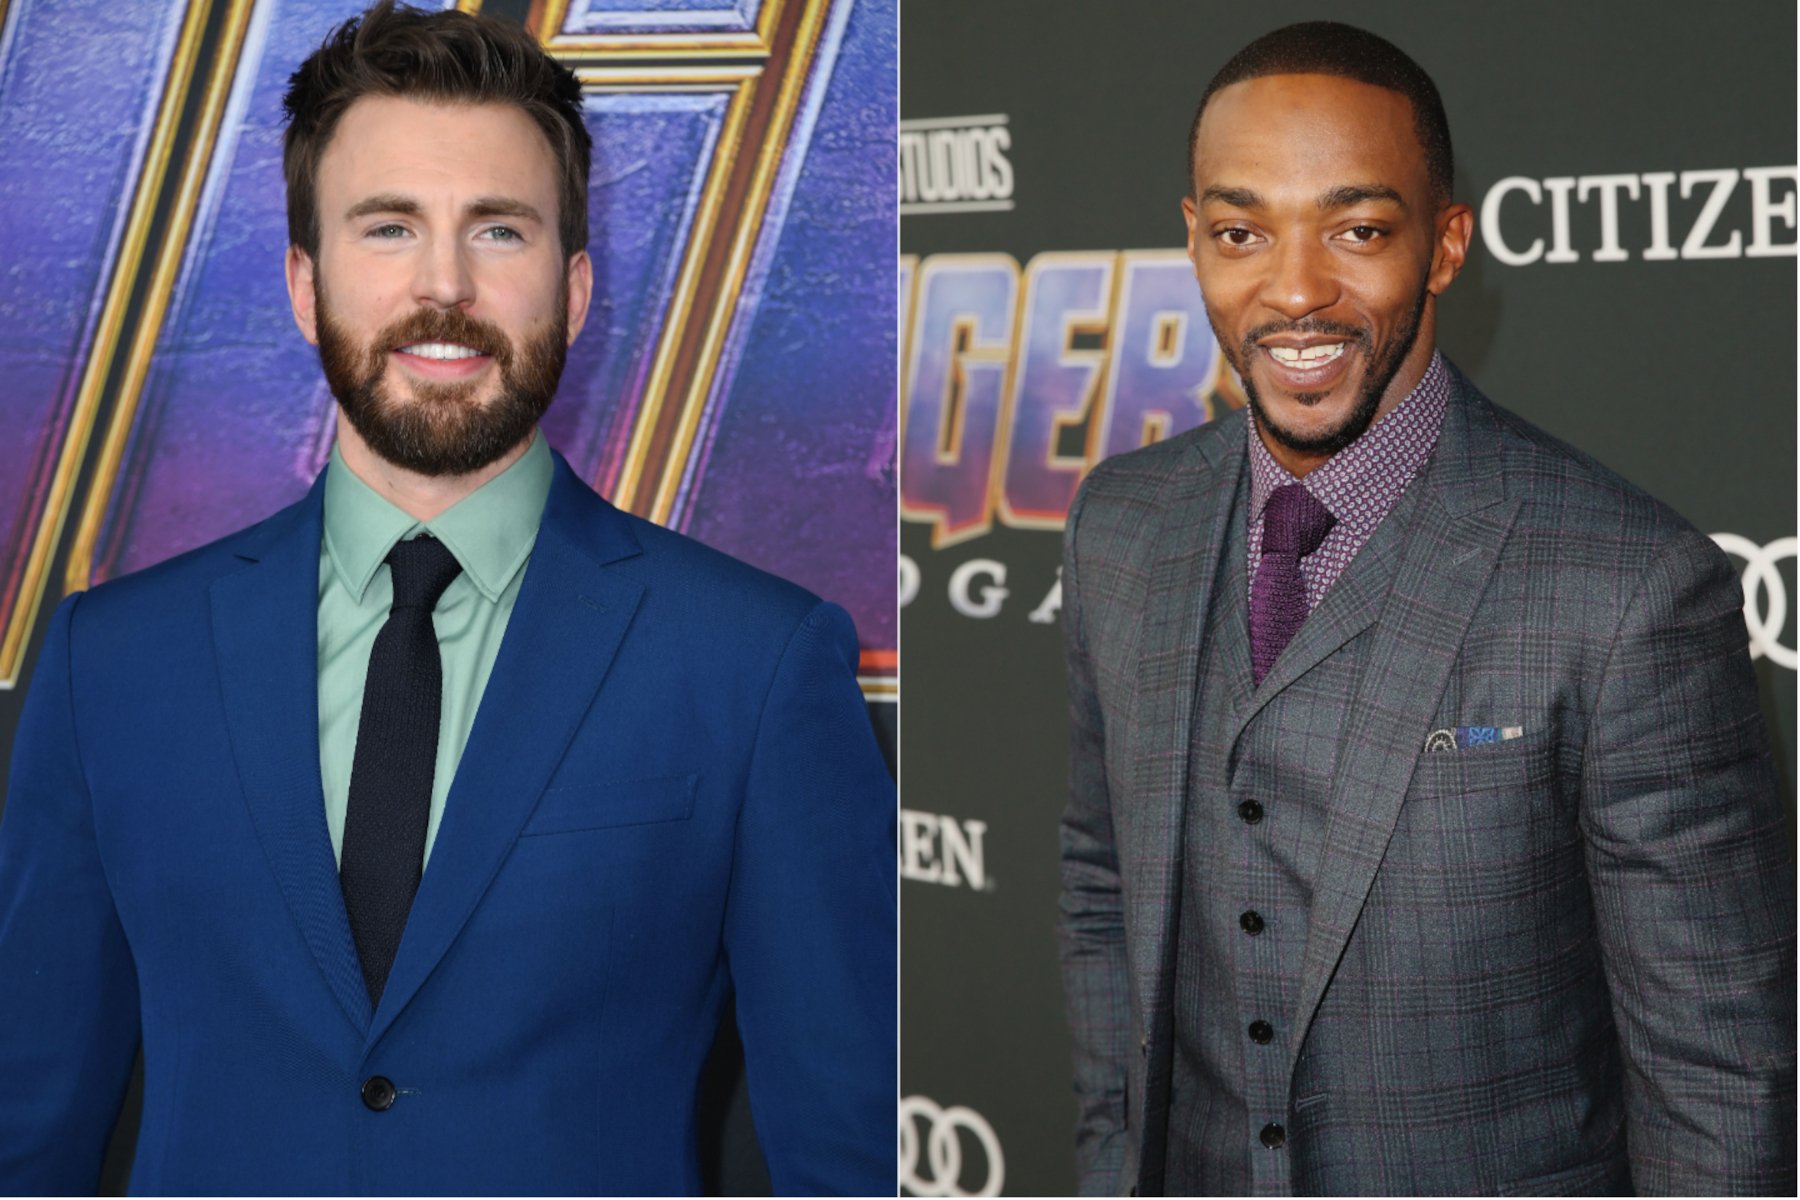 Chris Evans Believes There’s ‘No One Better’ to Play Captain America Than Anthony Mackie